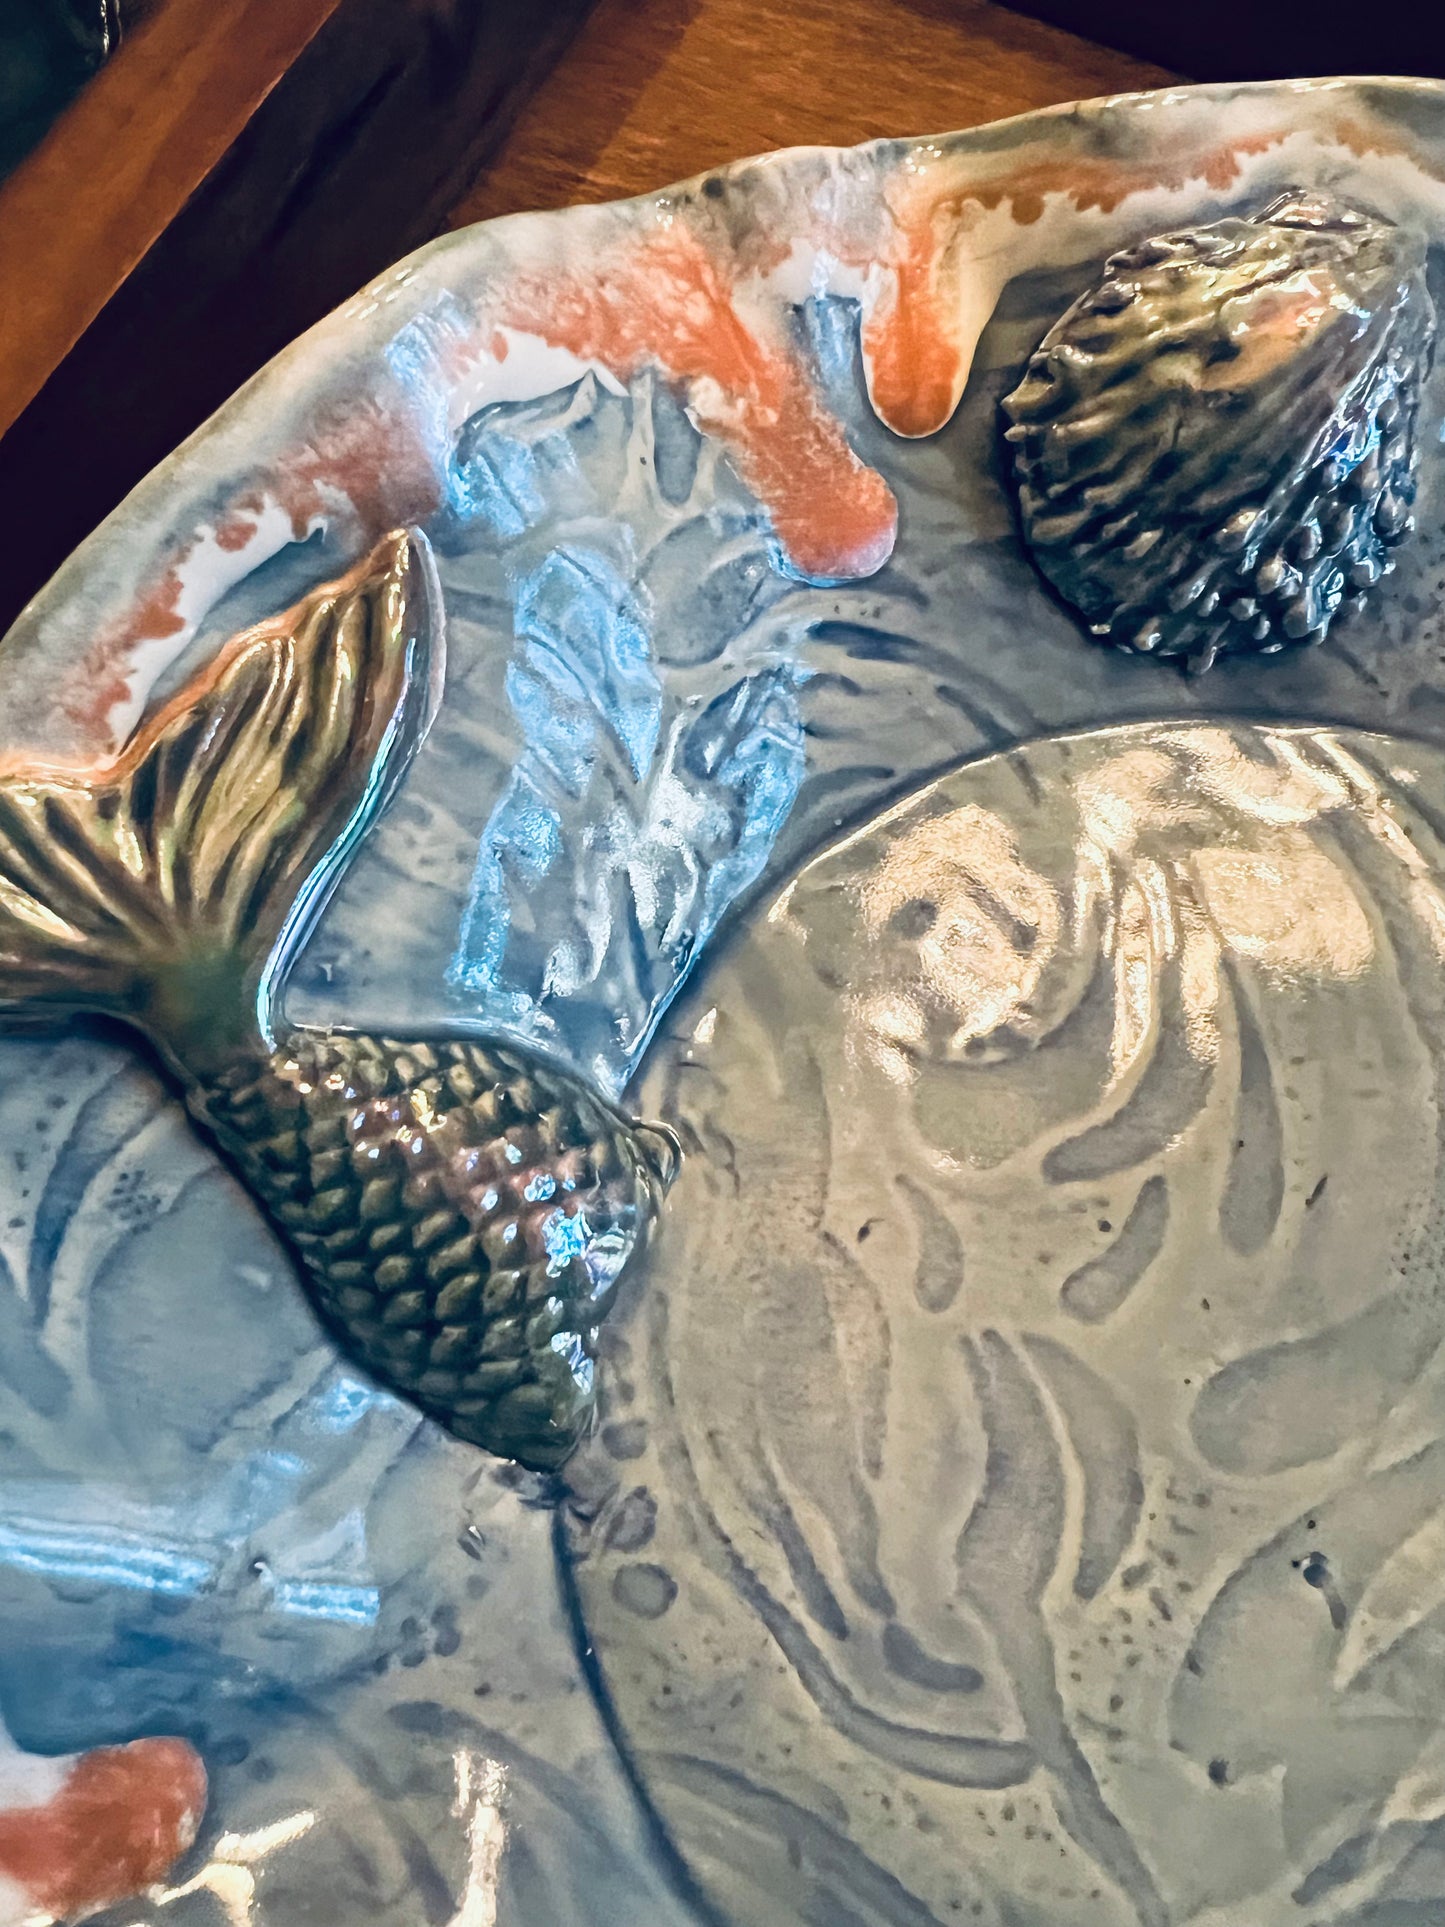 Sea Shells and Mermaid Tails Serving Platter